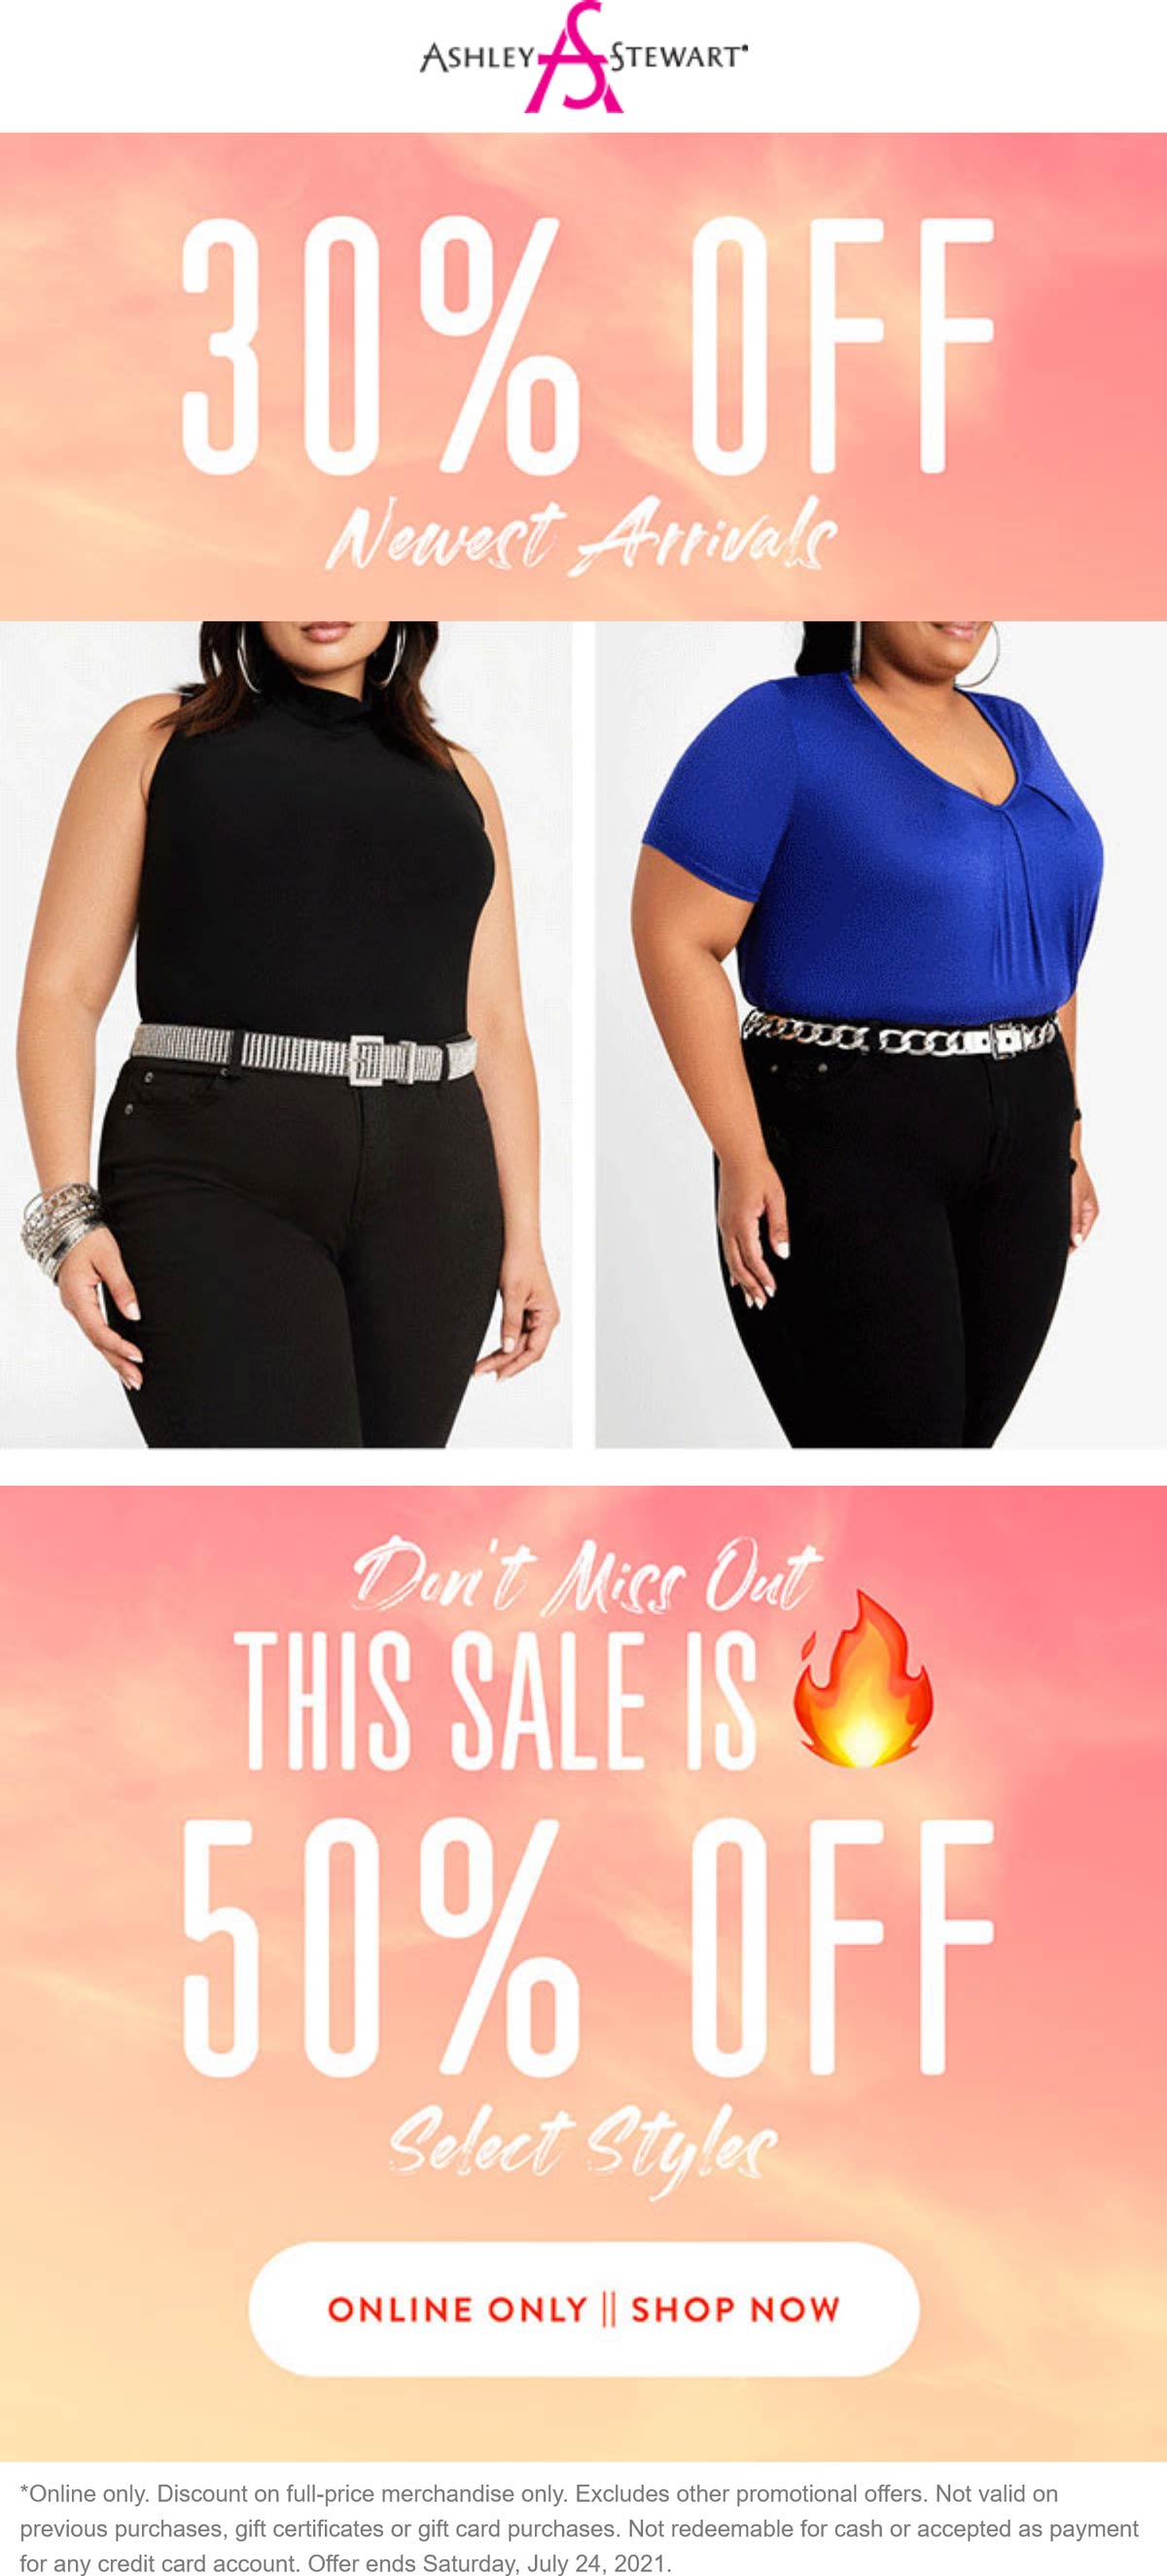 Ashley Stewart stores Coupon  30% off new arrivals online today at Ashley Stewart #ashleystewart 